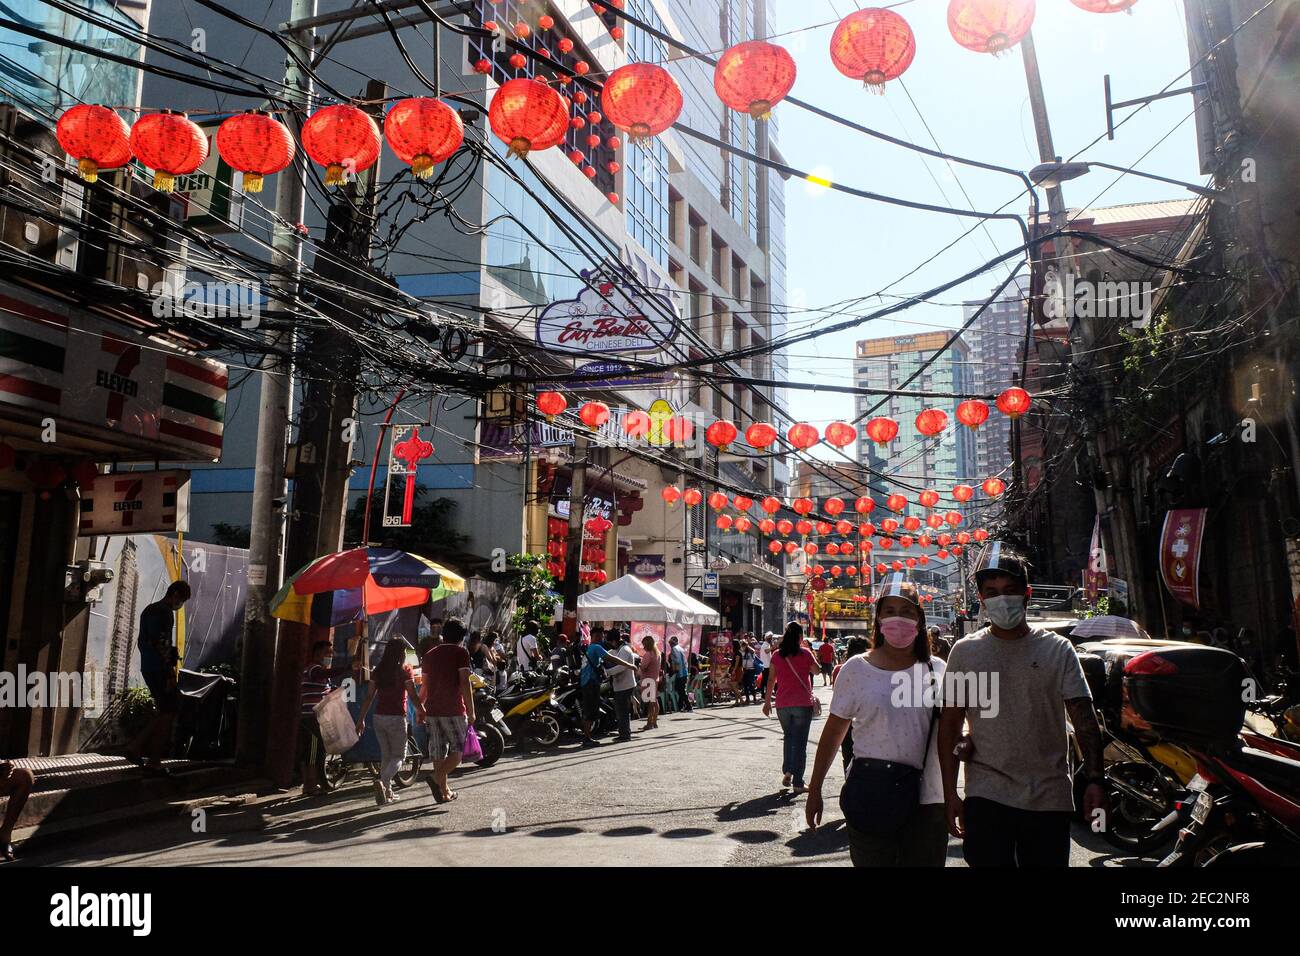 Ongpin St., Binondo, Manila, Philippines. 13th Feb, 2021. People wearing face masks and face shields walk along the streets adorned with Chinese lanterns in Ongpin, Binondo during the celebration of Chinese New Year. Binondo is known as the oldest chinatown in the world, majority of celebrations such as dragon and lion dances were cancelled due to the pandemic. Credit: Majority World CIC/Alamy Live News Stock Photo